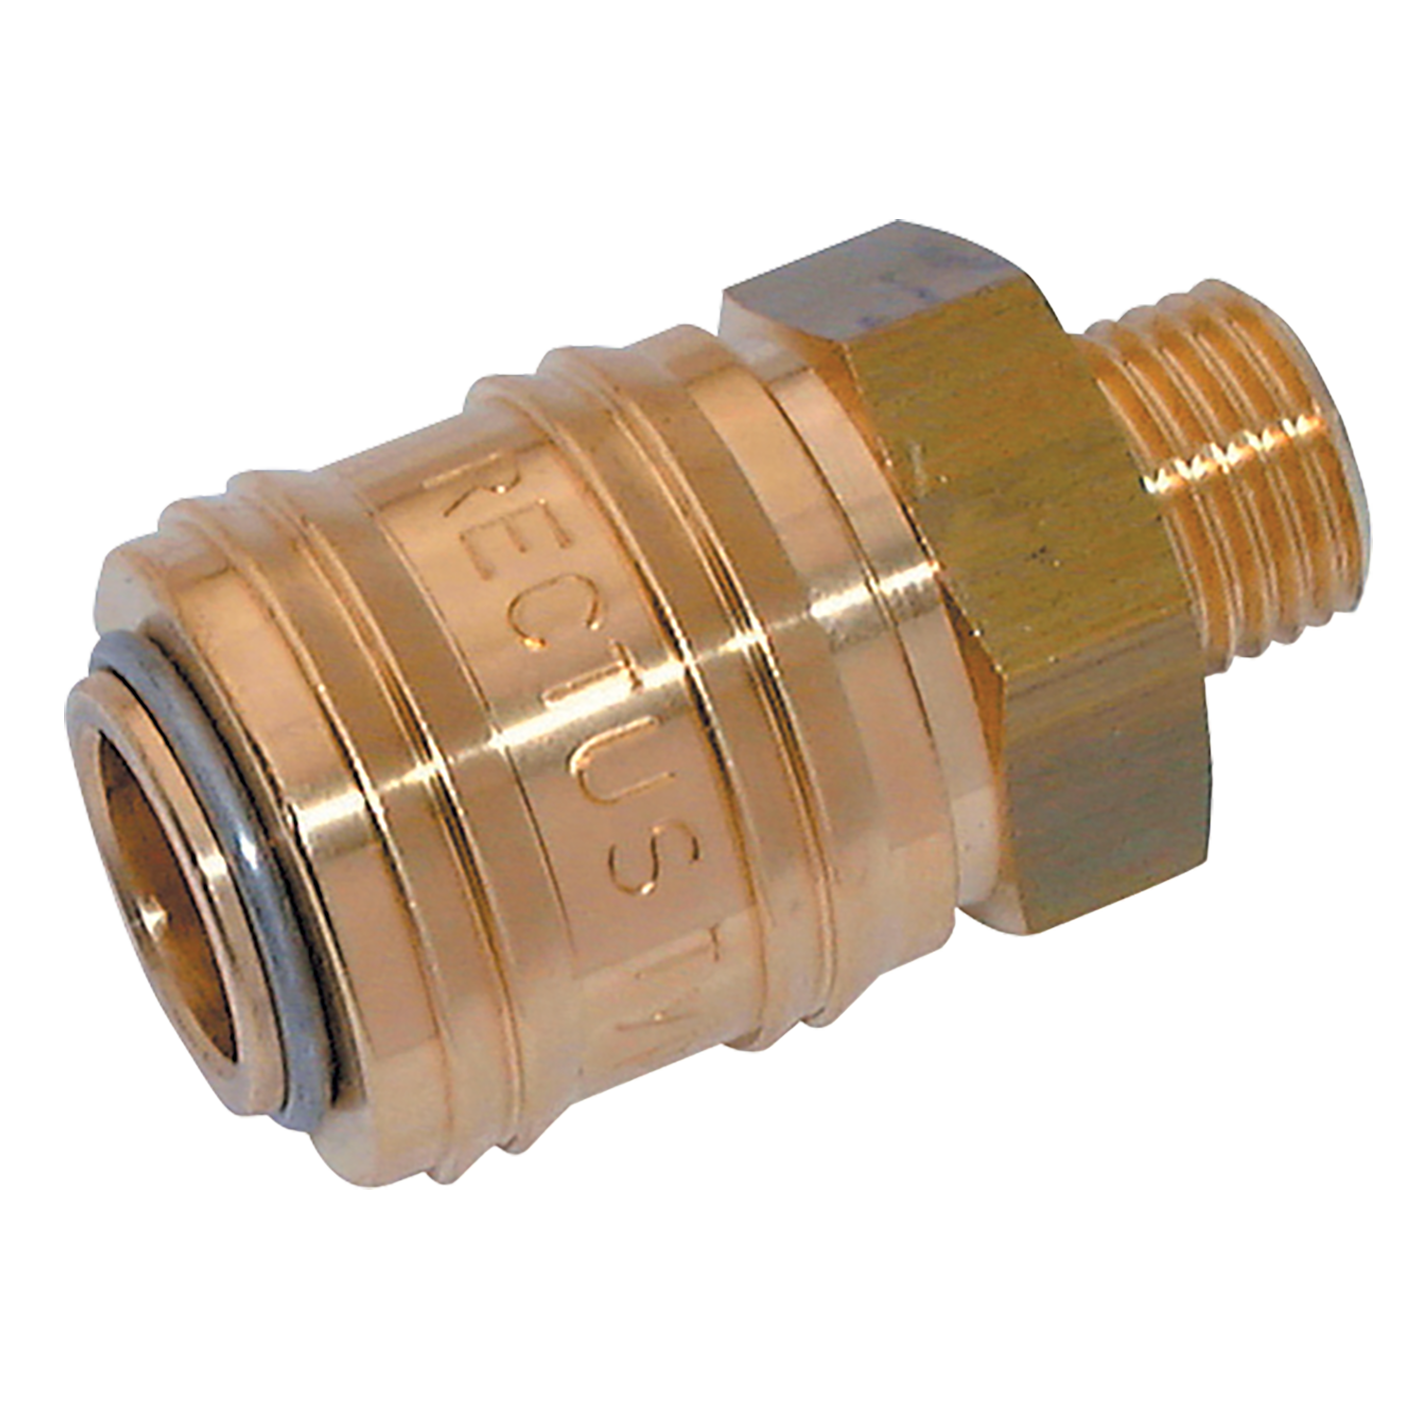 1/2" BSPP Male Coupling